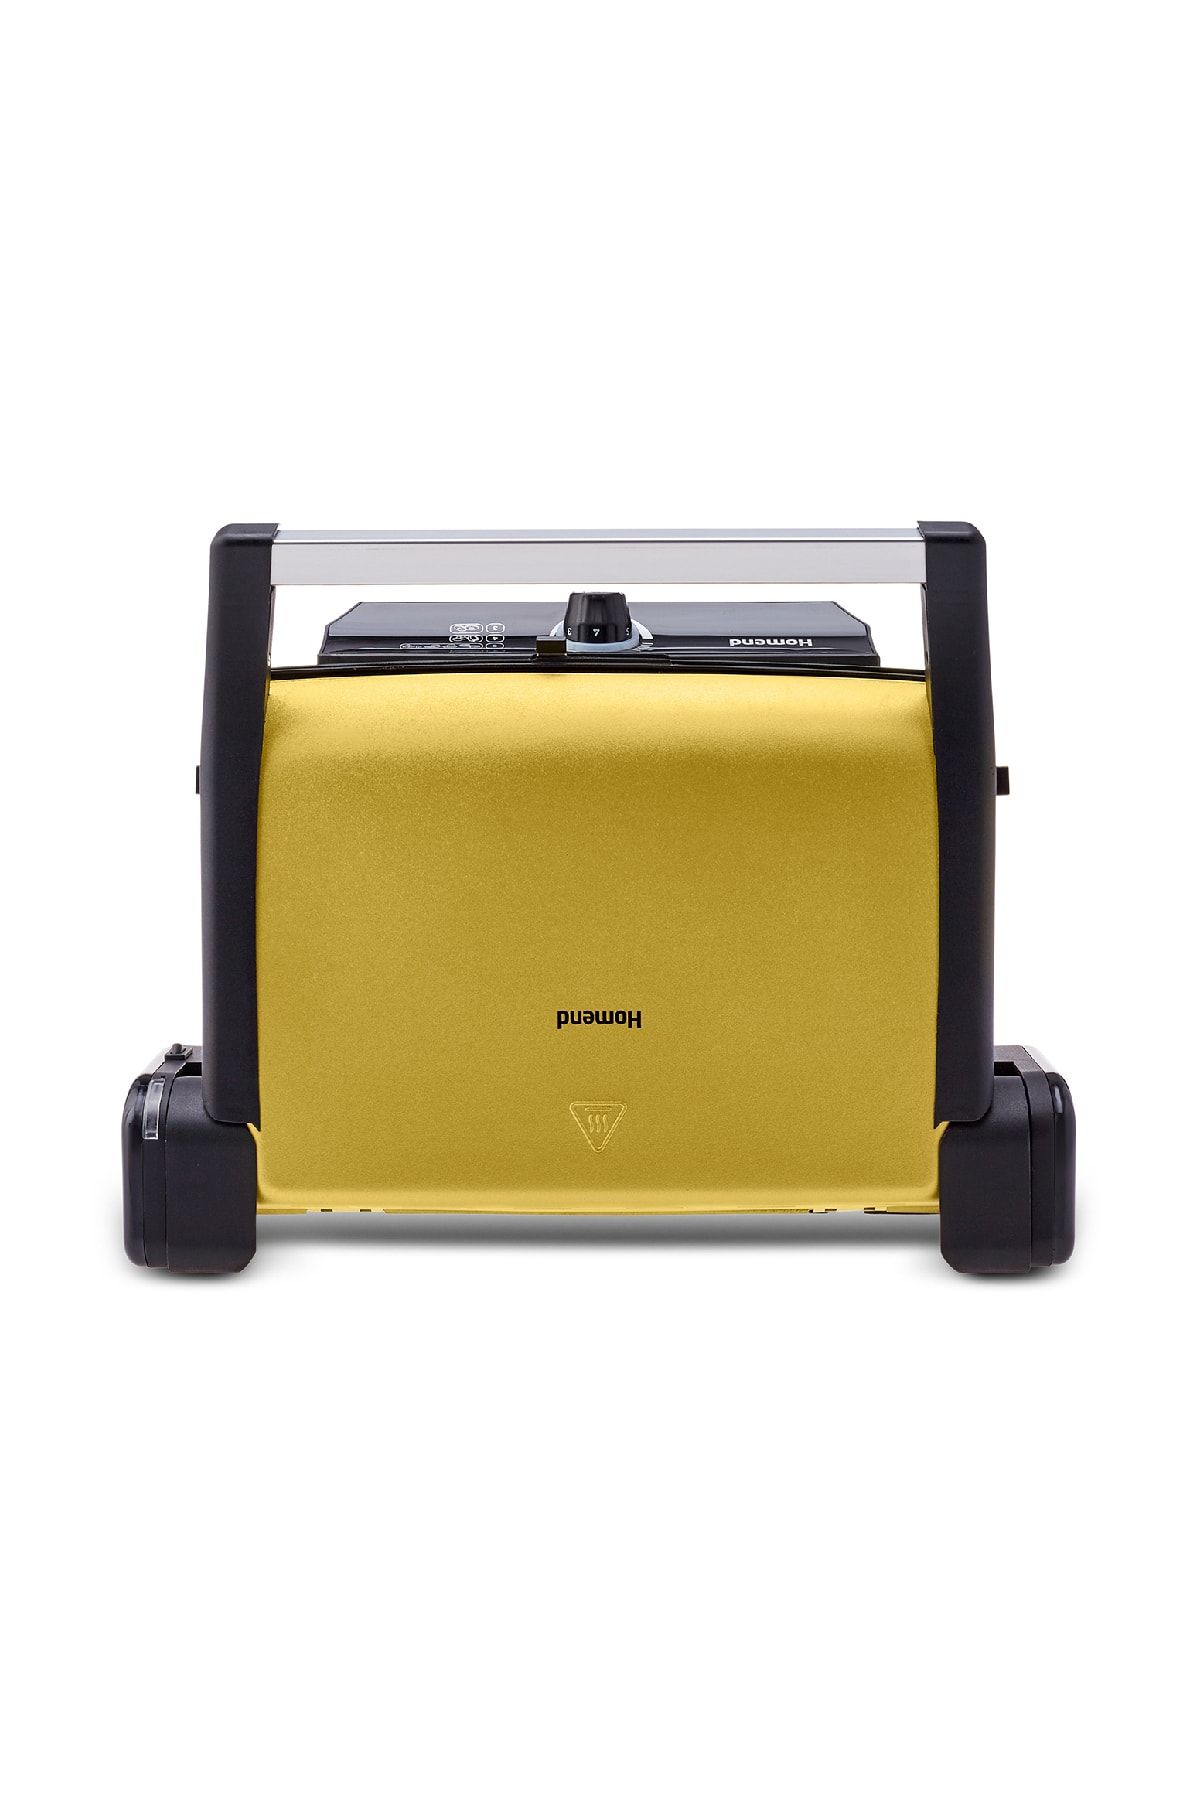 HOMEND Toastbuster 1378h Gold Tost Makinesi